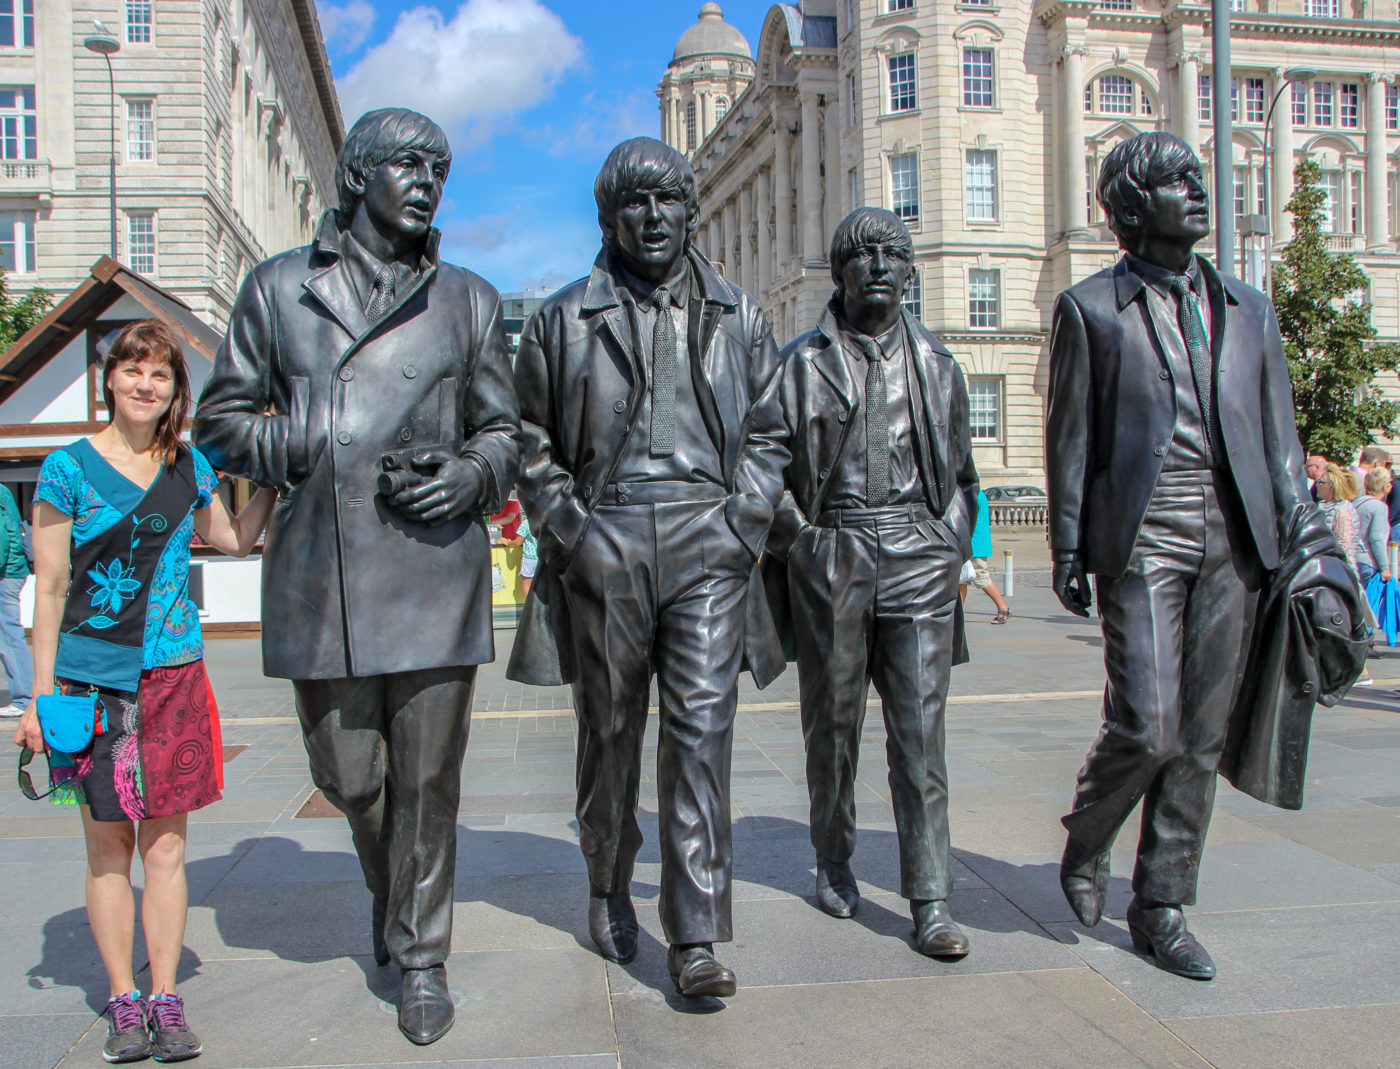 The Beatle’s Magical Mystery Tour in Liverpool – Let It Be